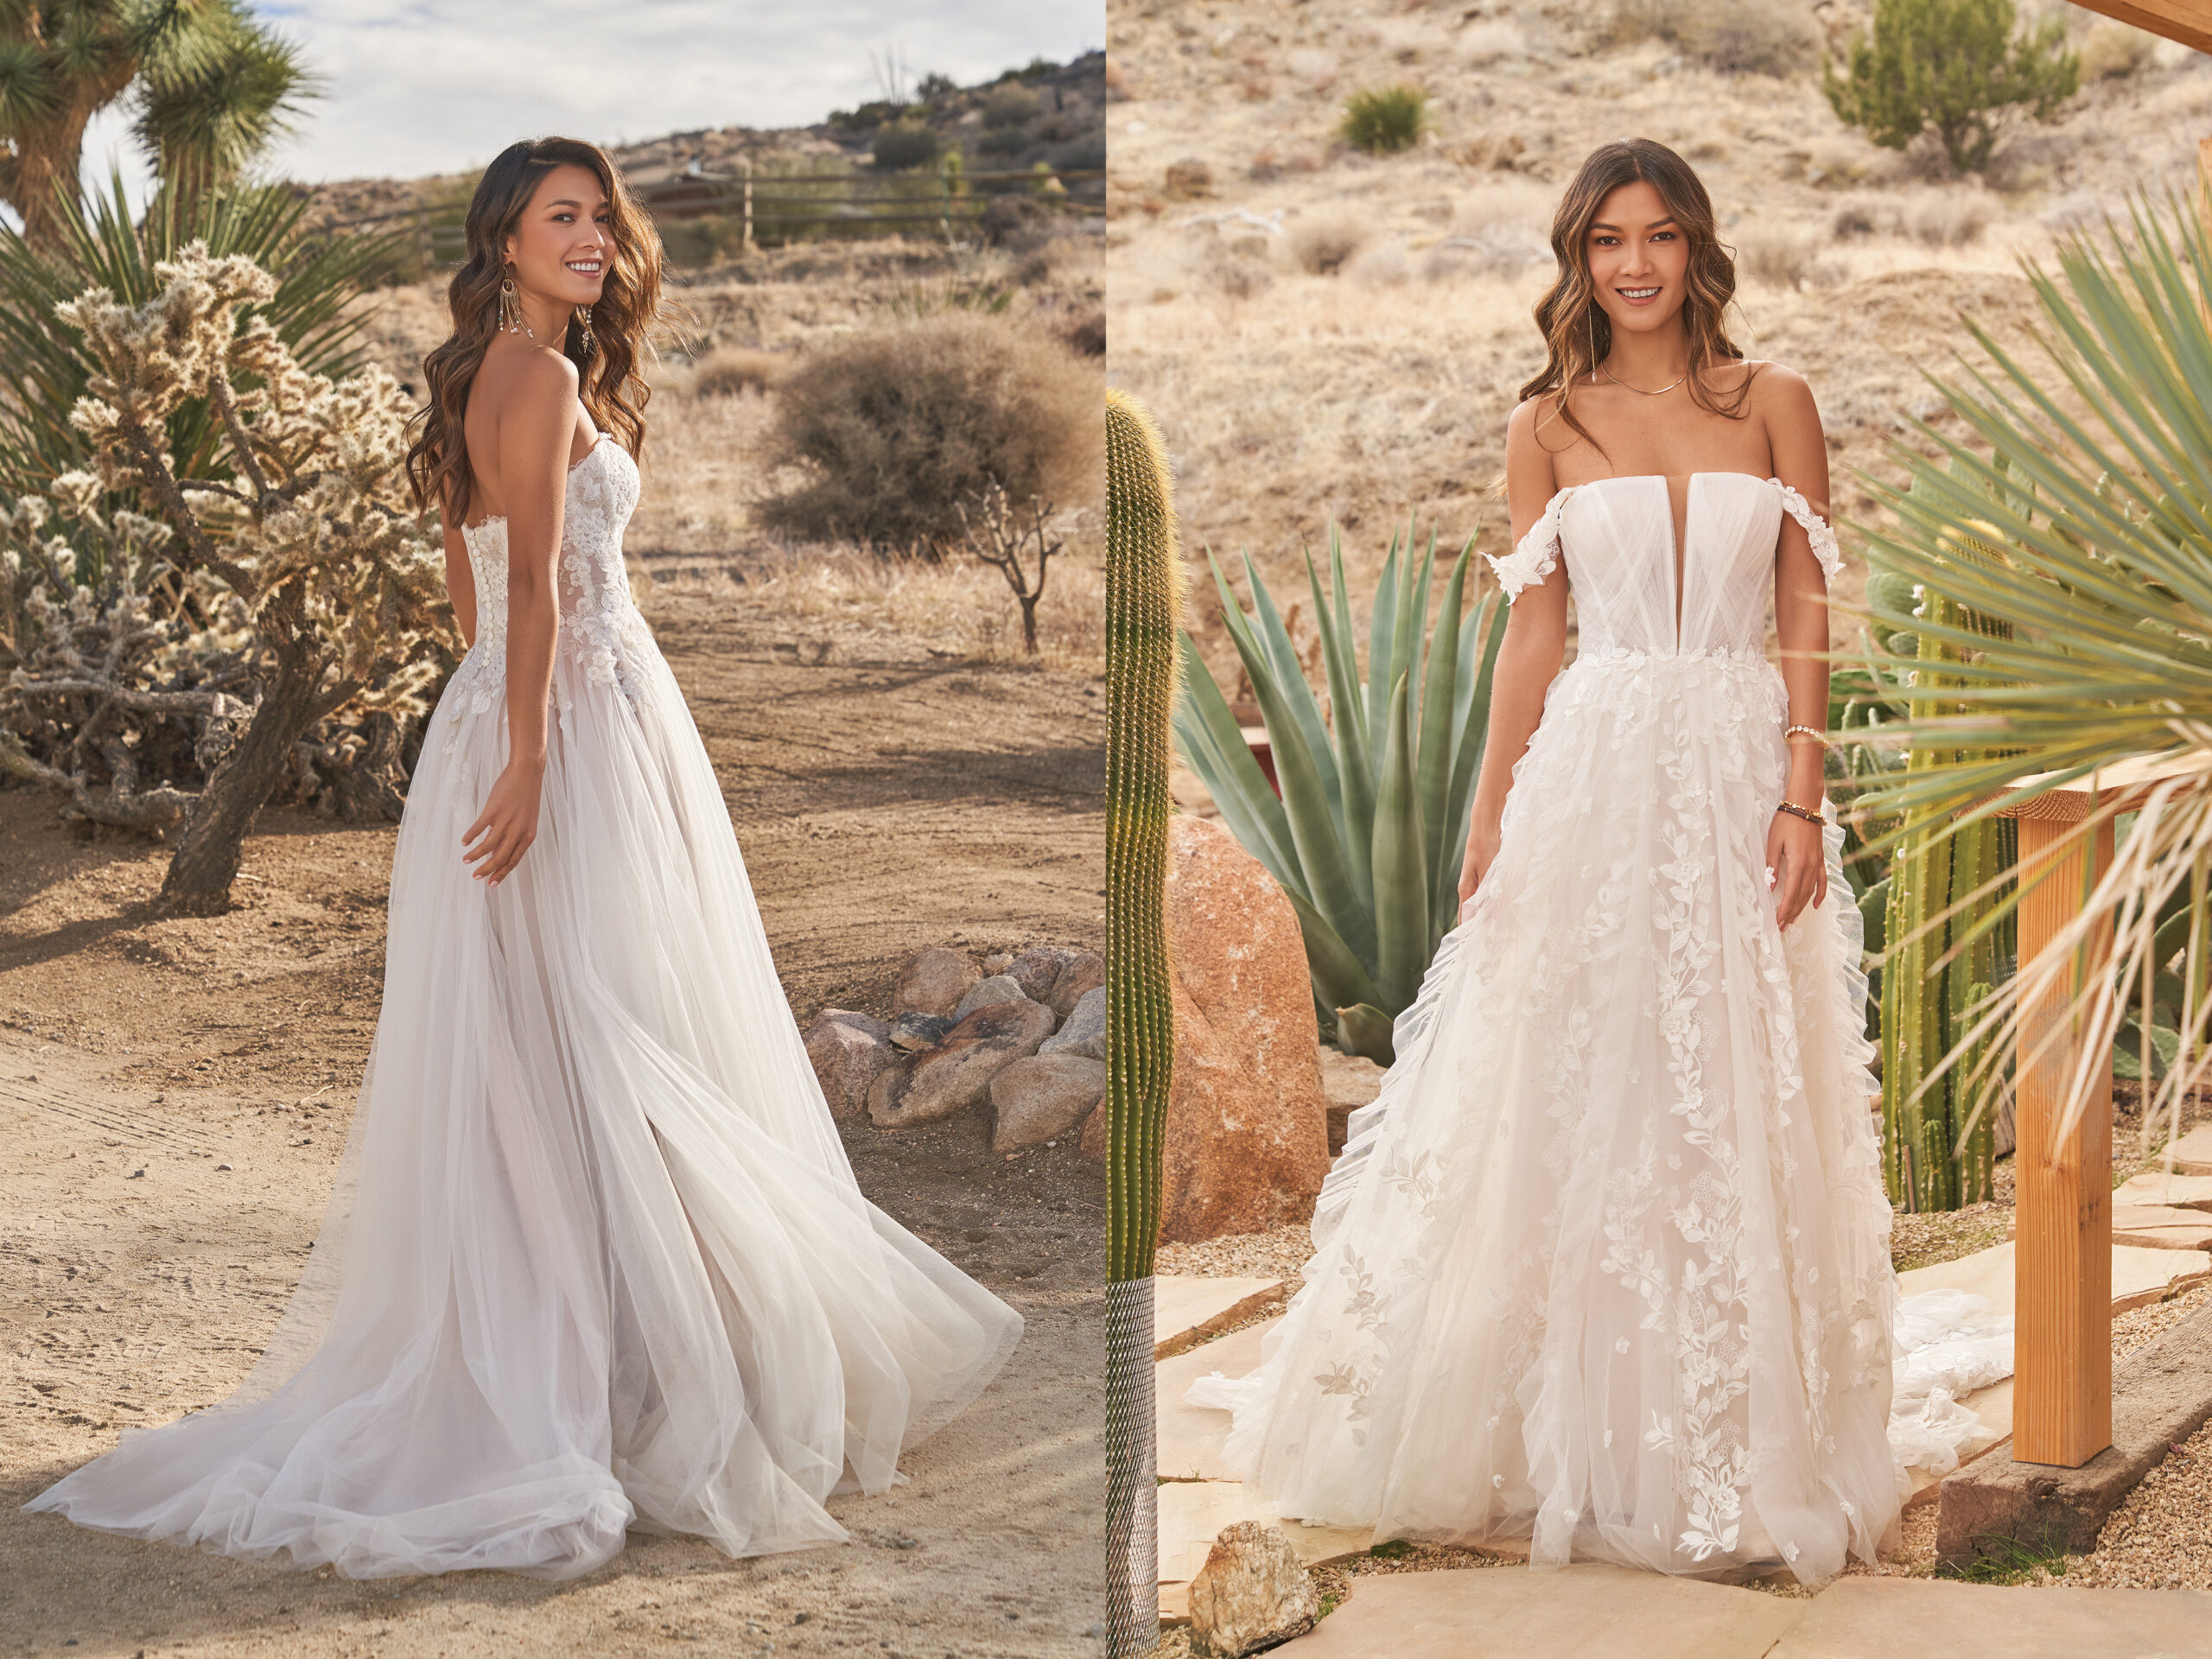 two images stitched side by side displaying brides posing in Lillian West bridal dresses in desert areas